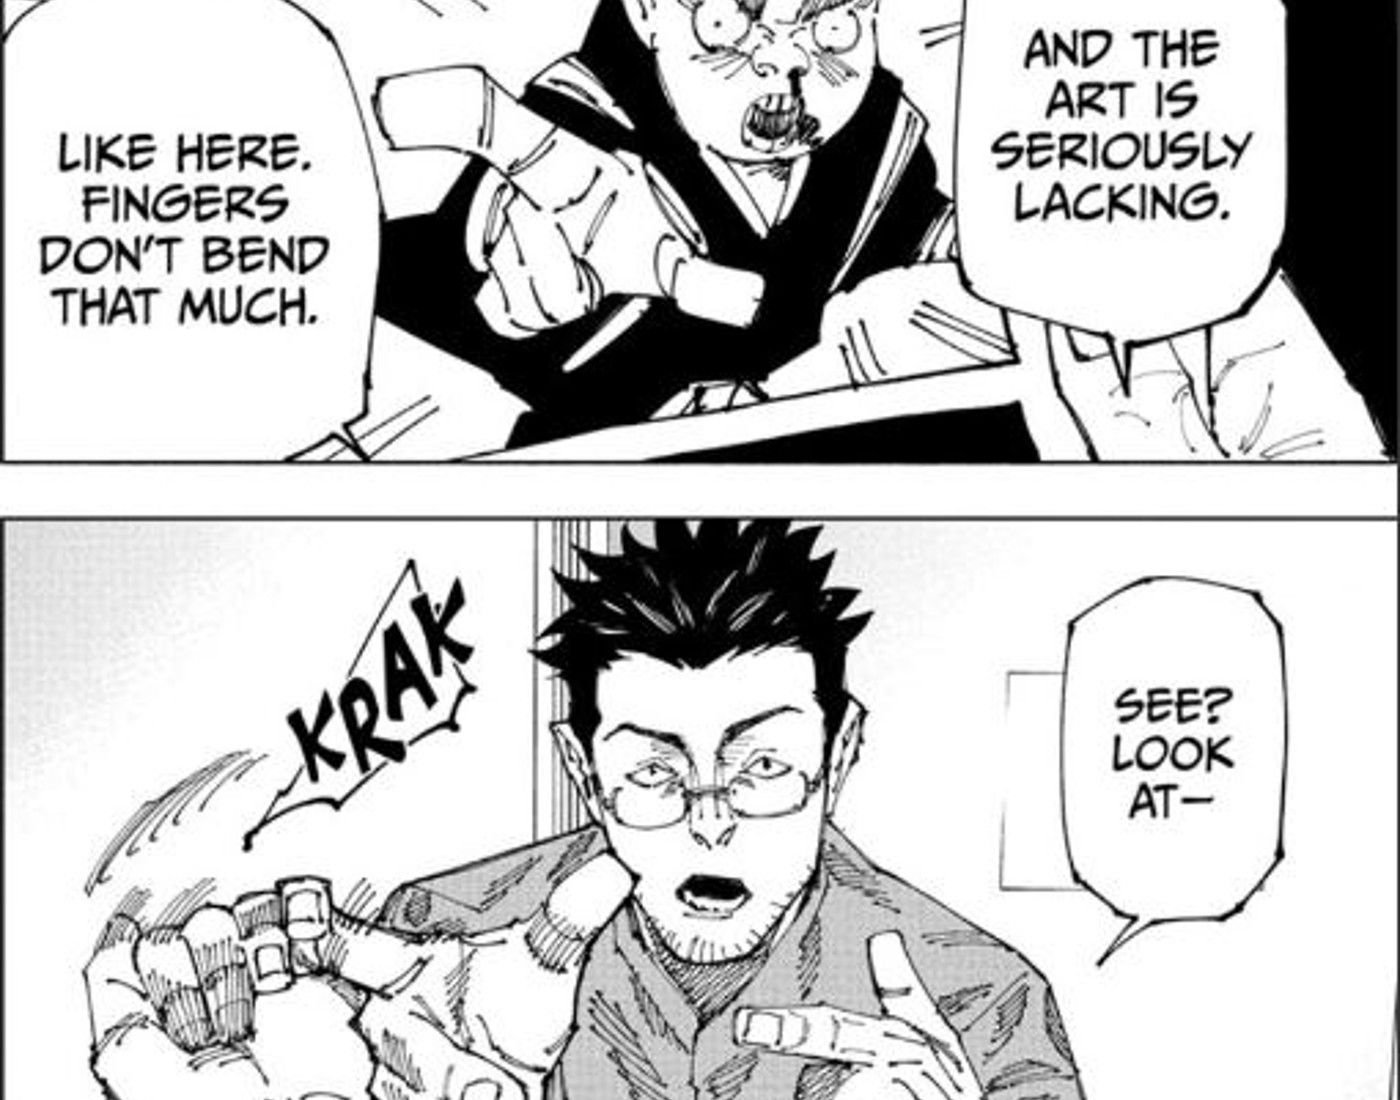 Jujutsu Kaisen Just Called Out Its Critics In the Best Way